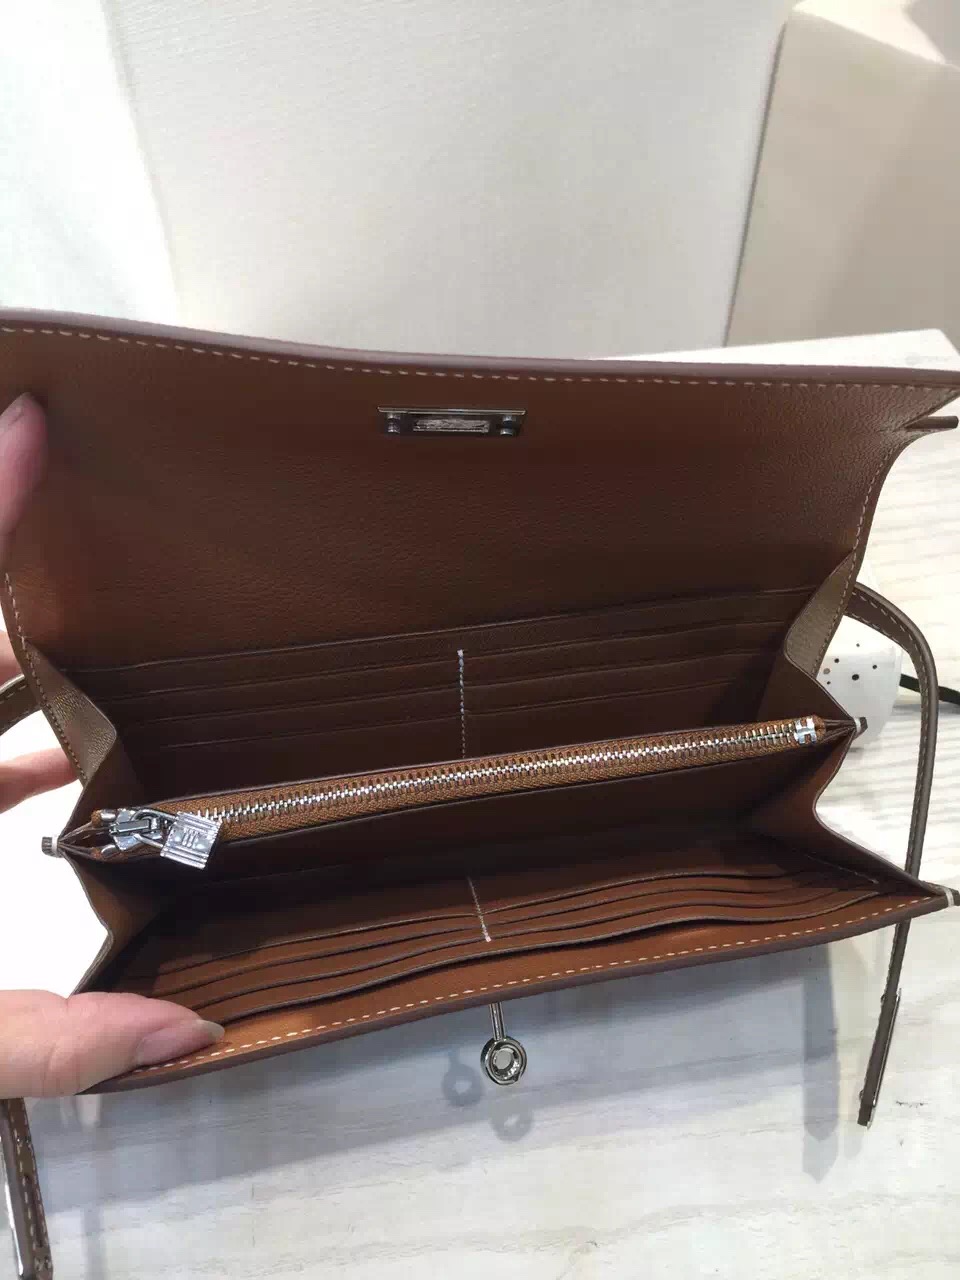 Hand Stitching Hermes Epsom Leather Kelly Wallet in Camel